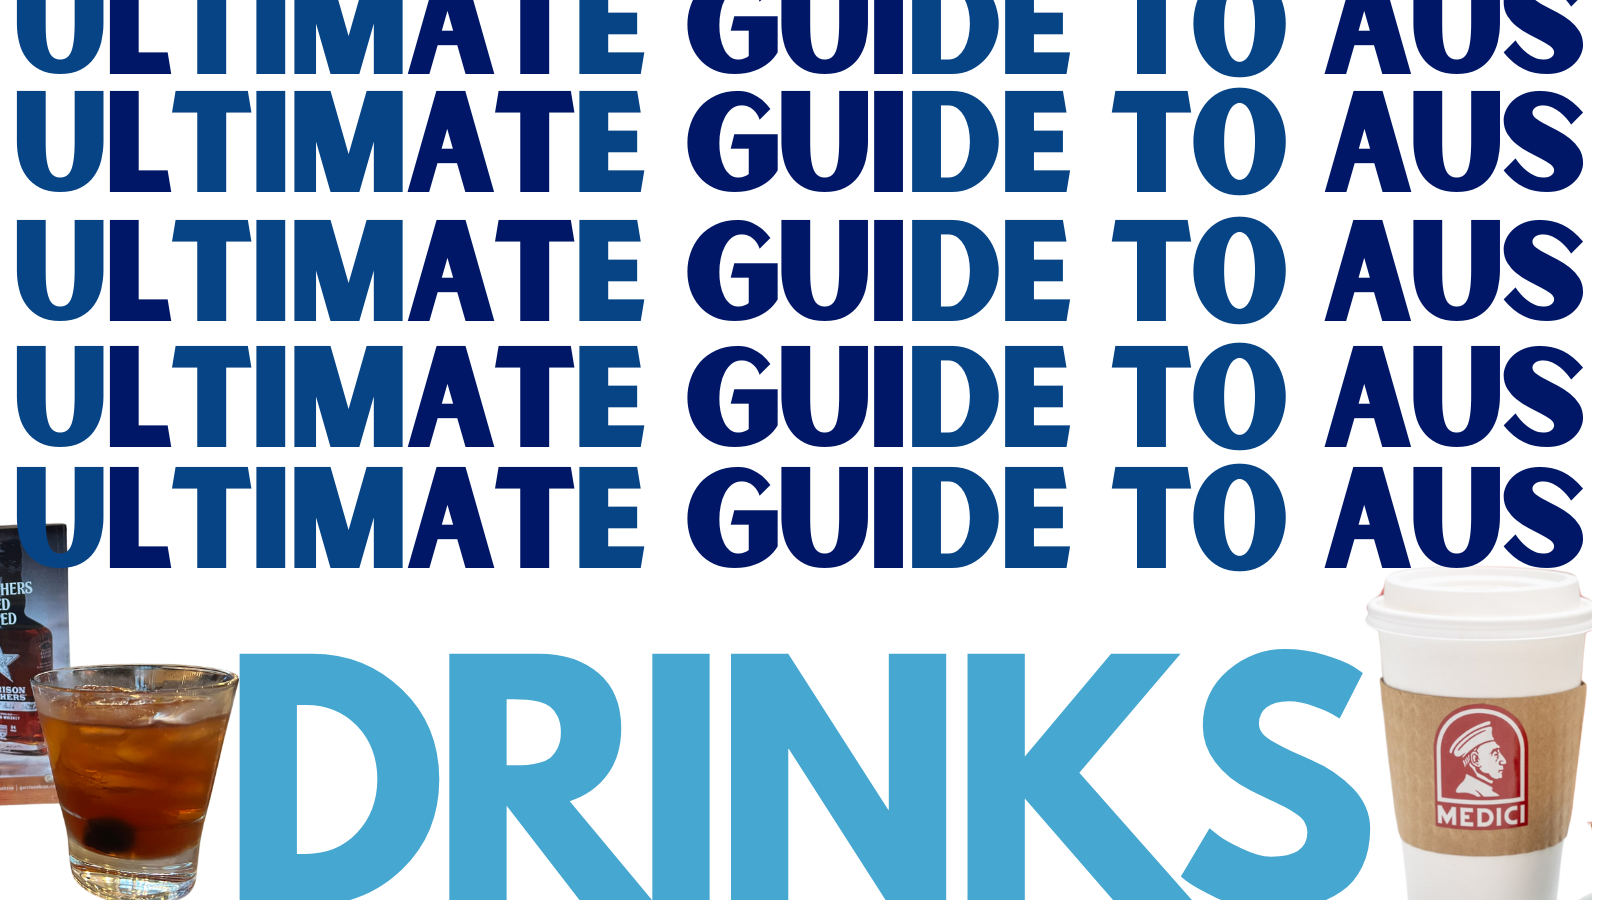 Text reads: Ultimate guide to aus - drinks. Photos of a Medici coffee and cocktail are at the bottom.